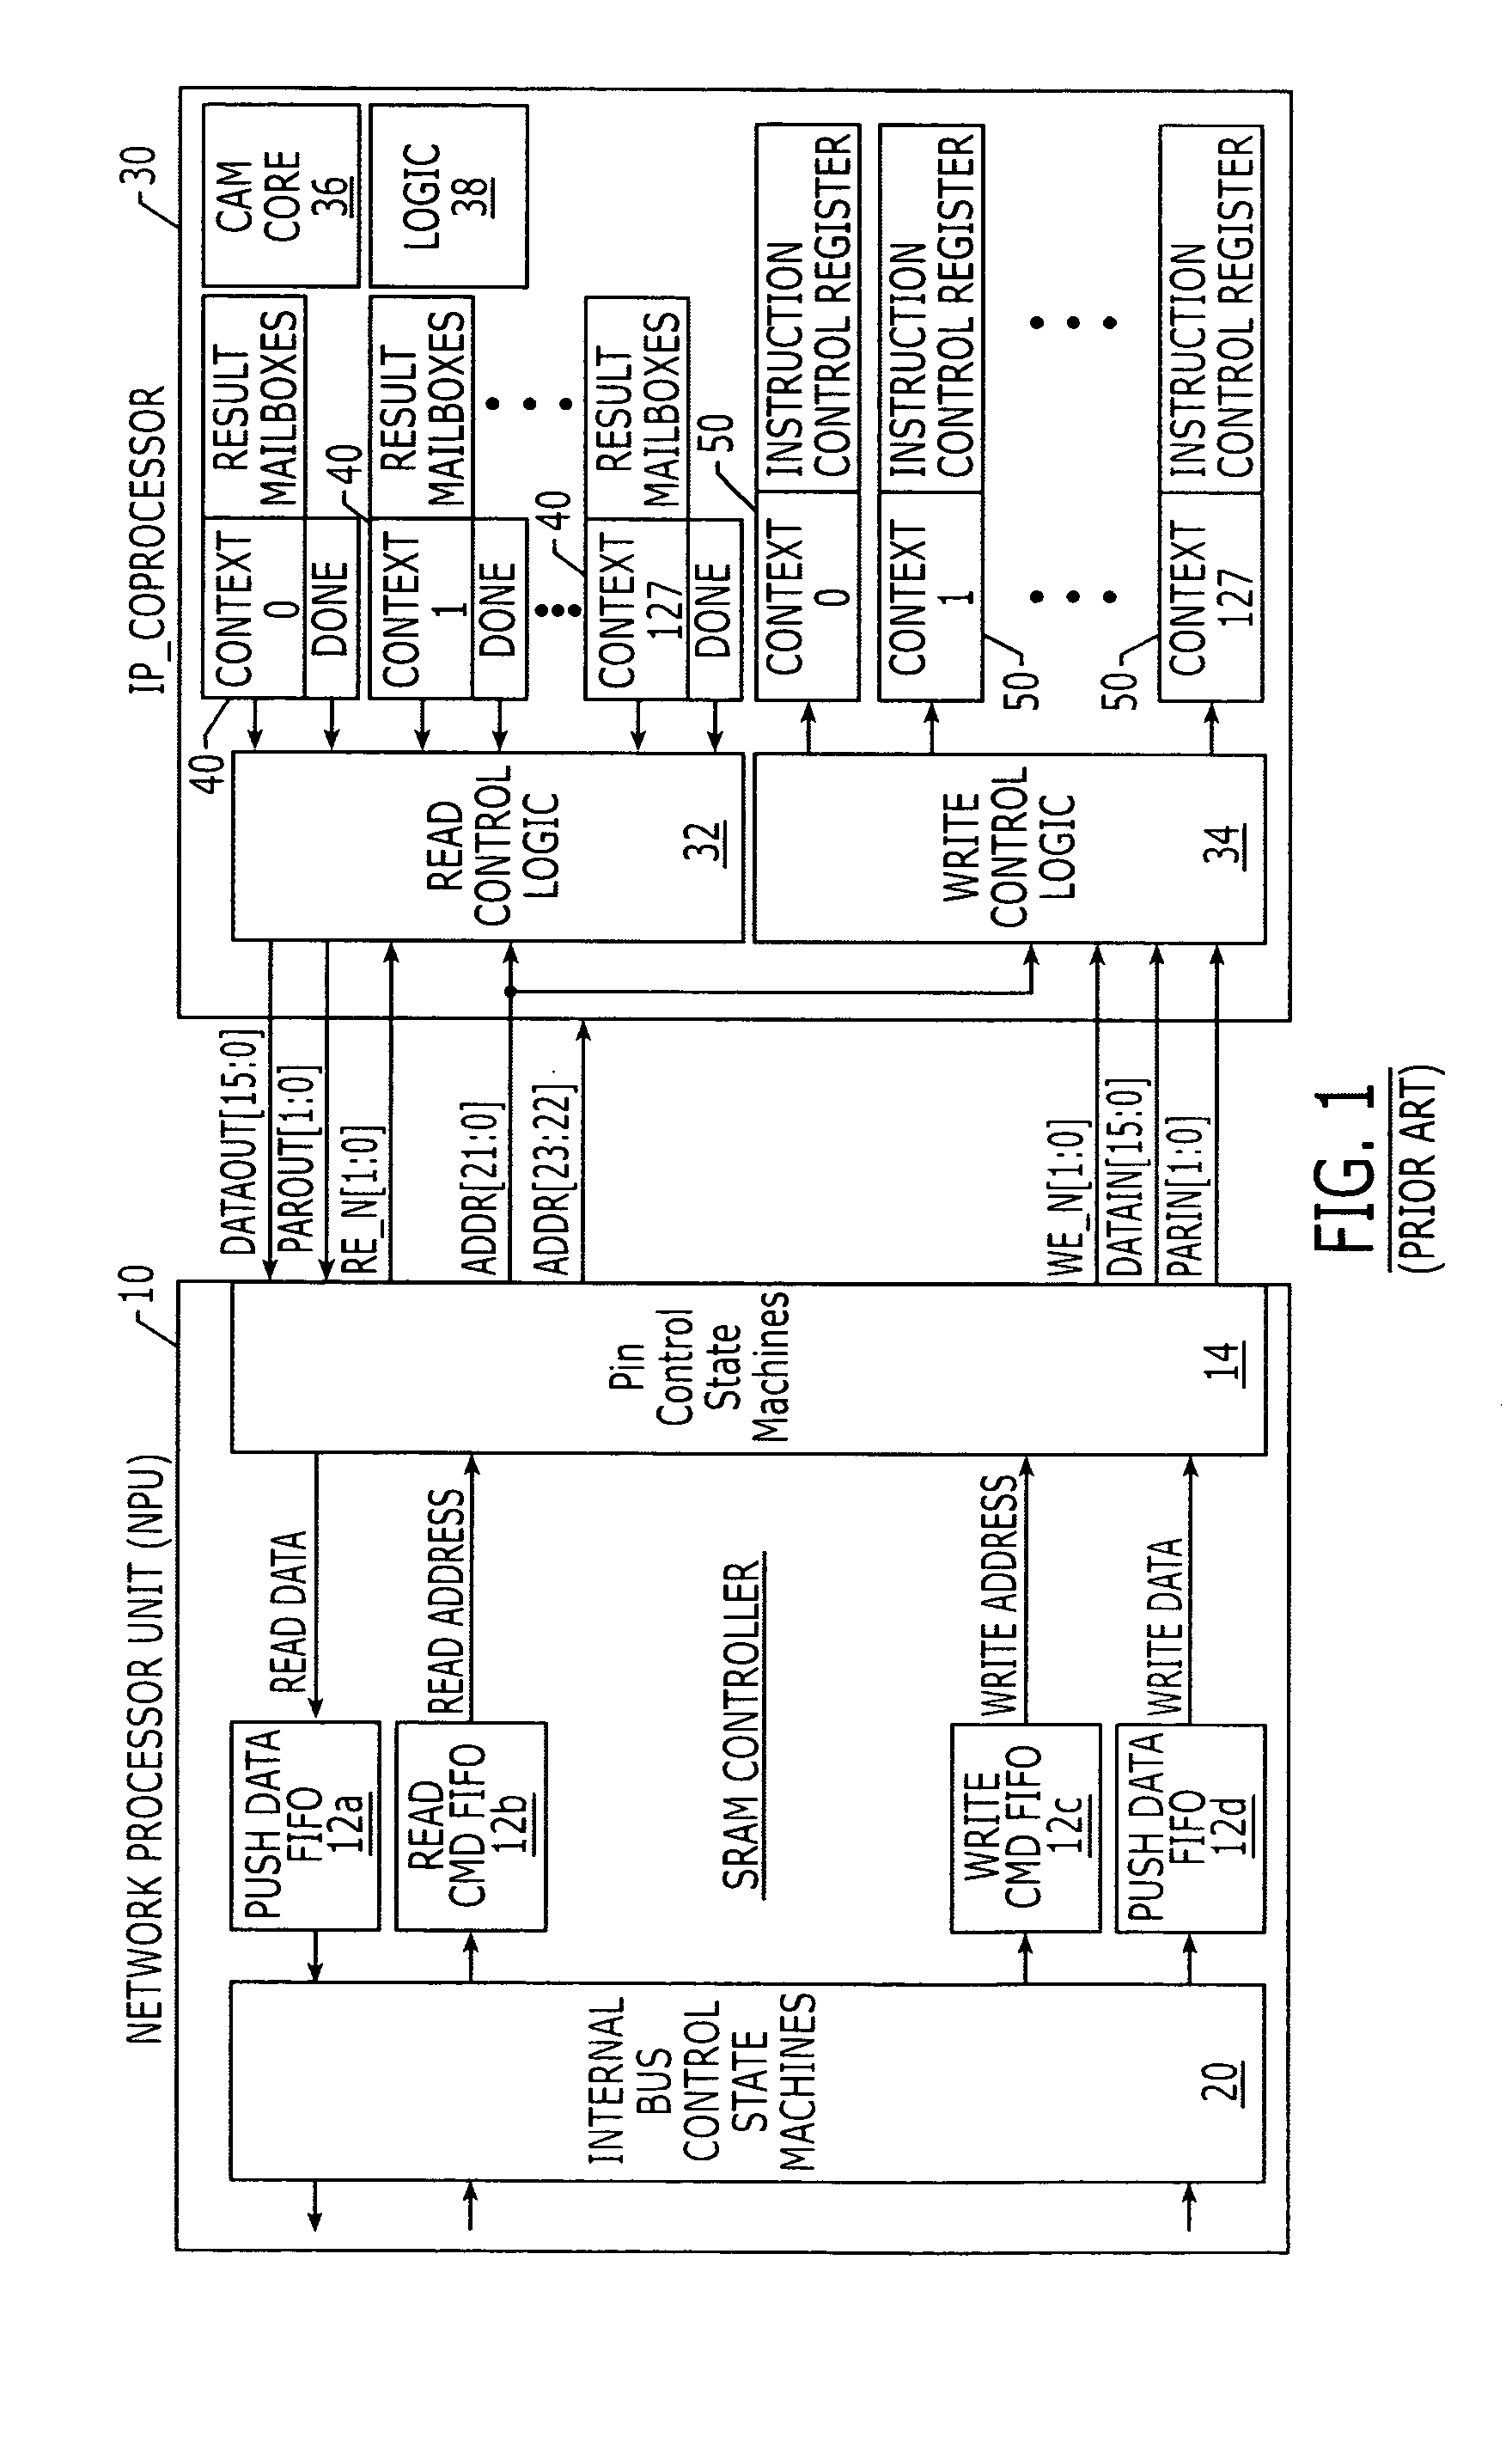 CAM-based search engine devices having index translation capability